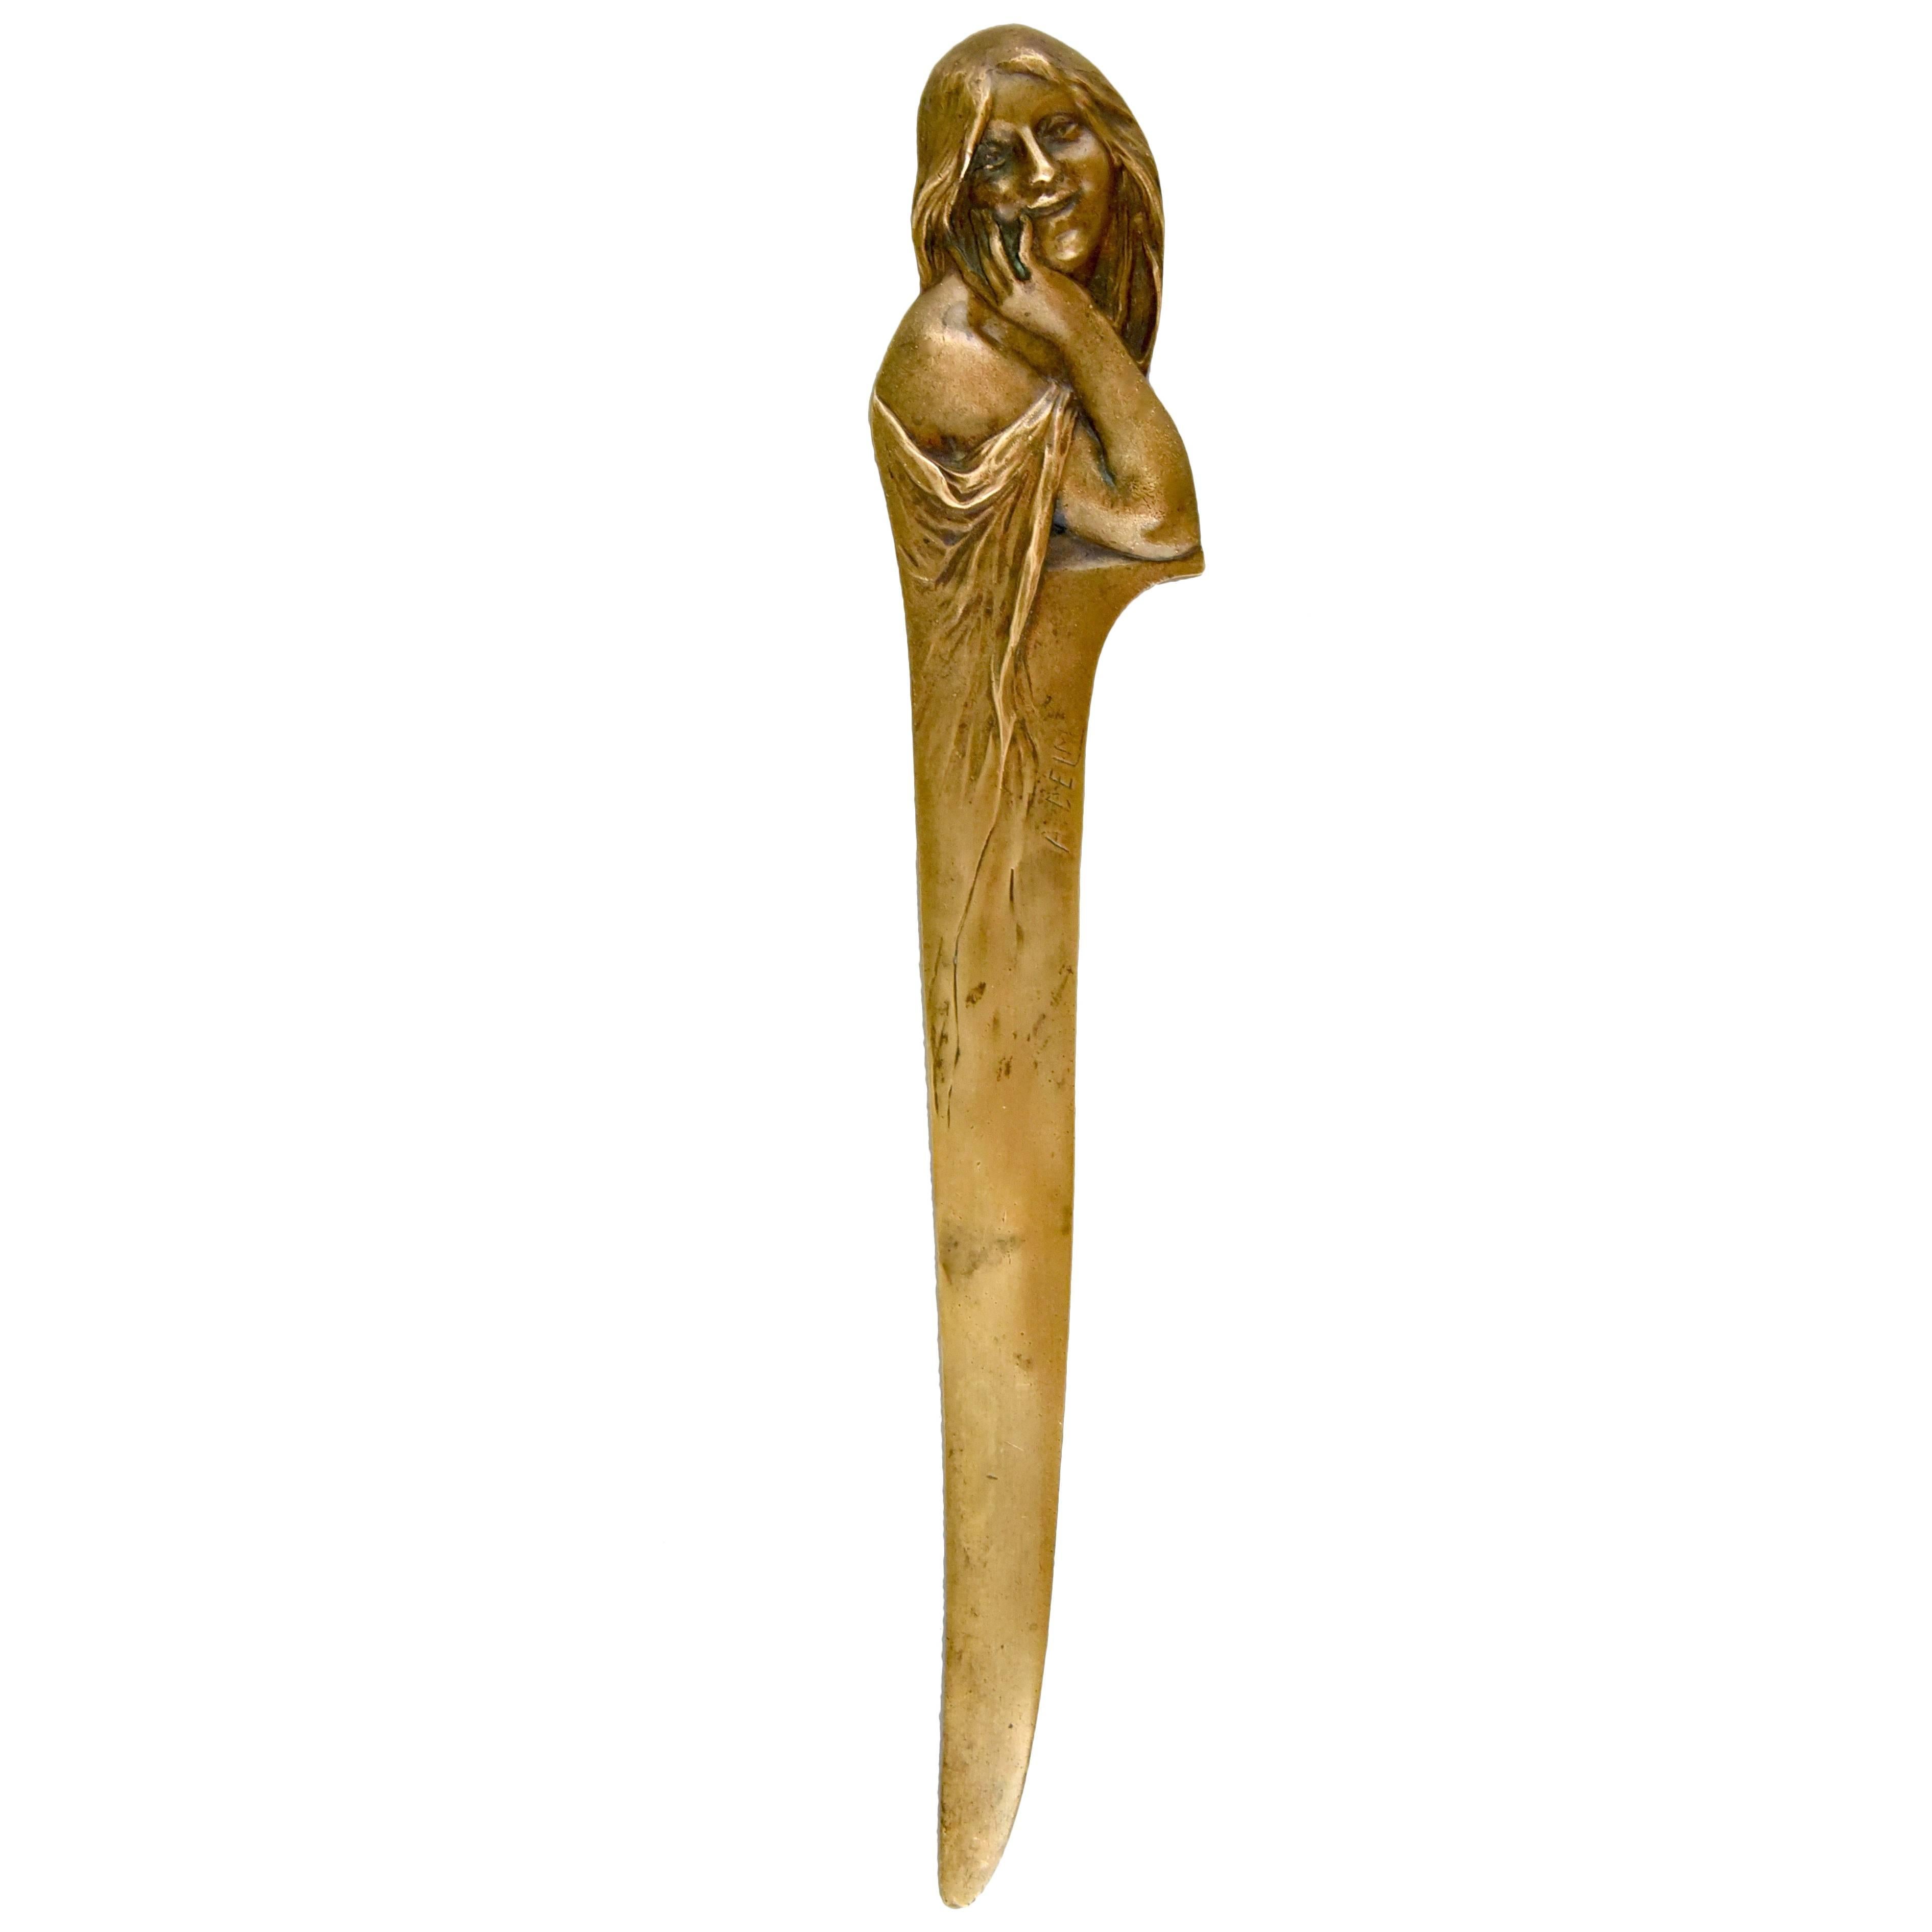 French Art Nouveau Bronze Letteropener with Lady, Signed A. Delm, 1900